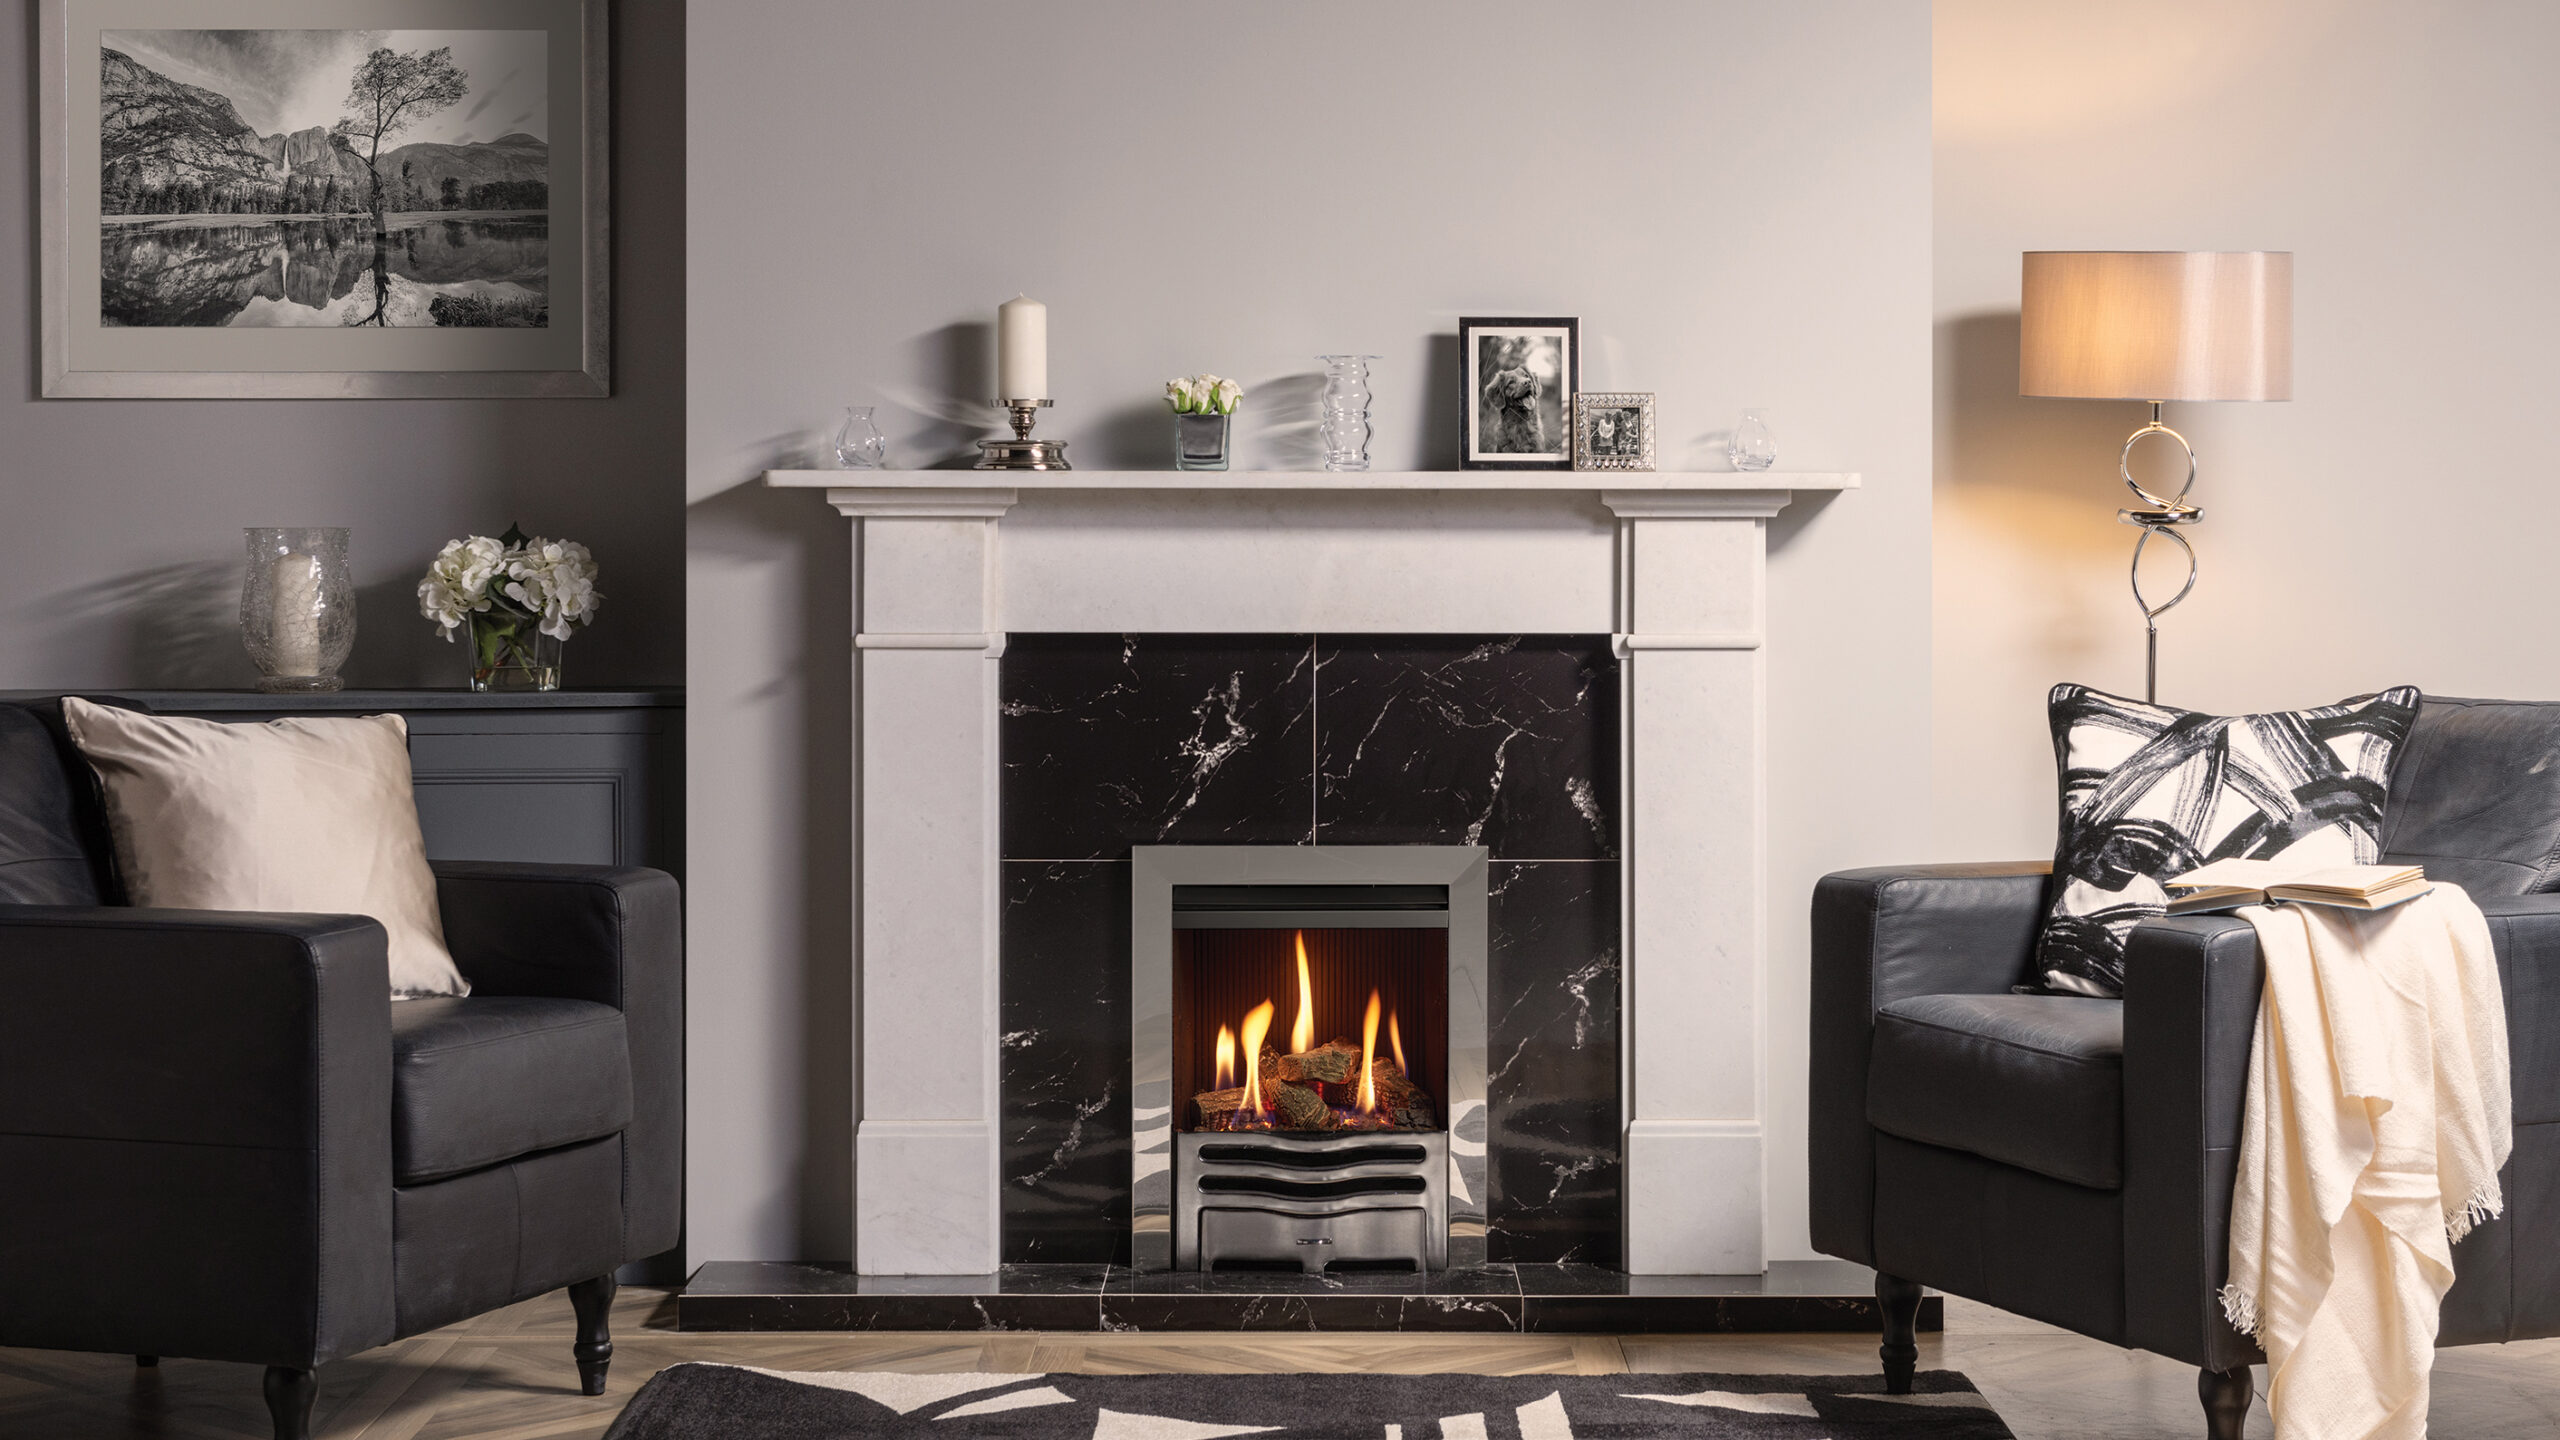  Hearth Mounted Gas Fires